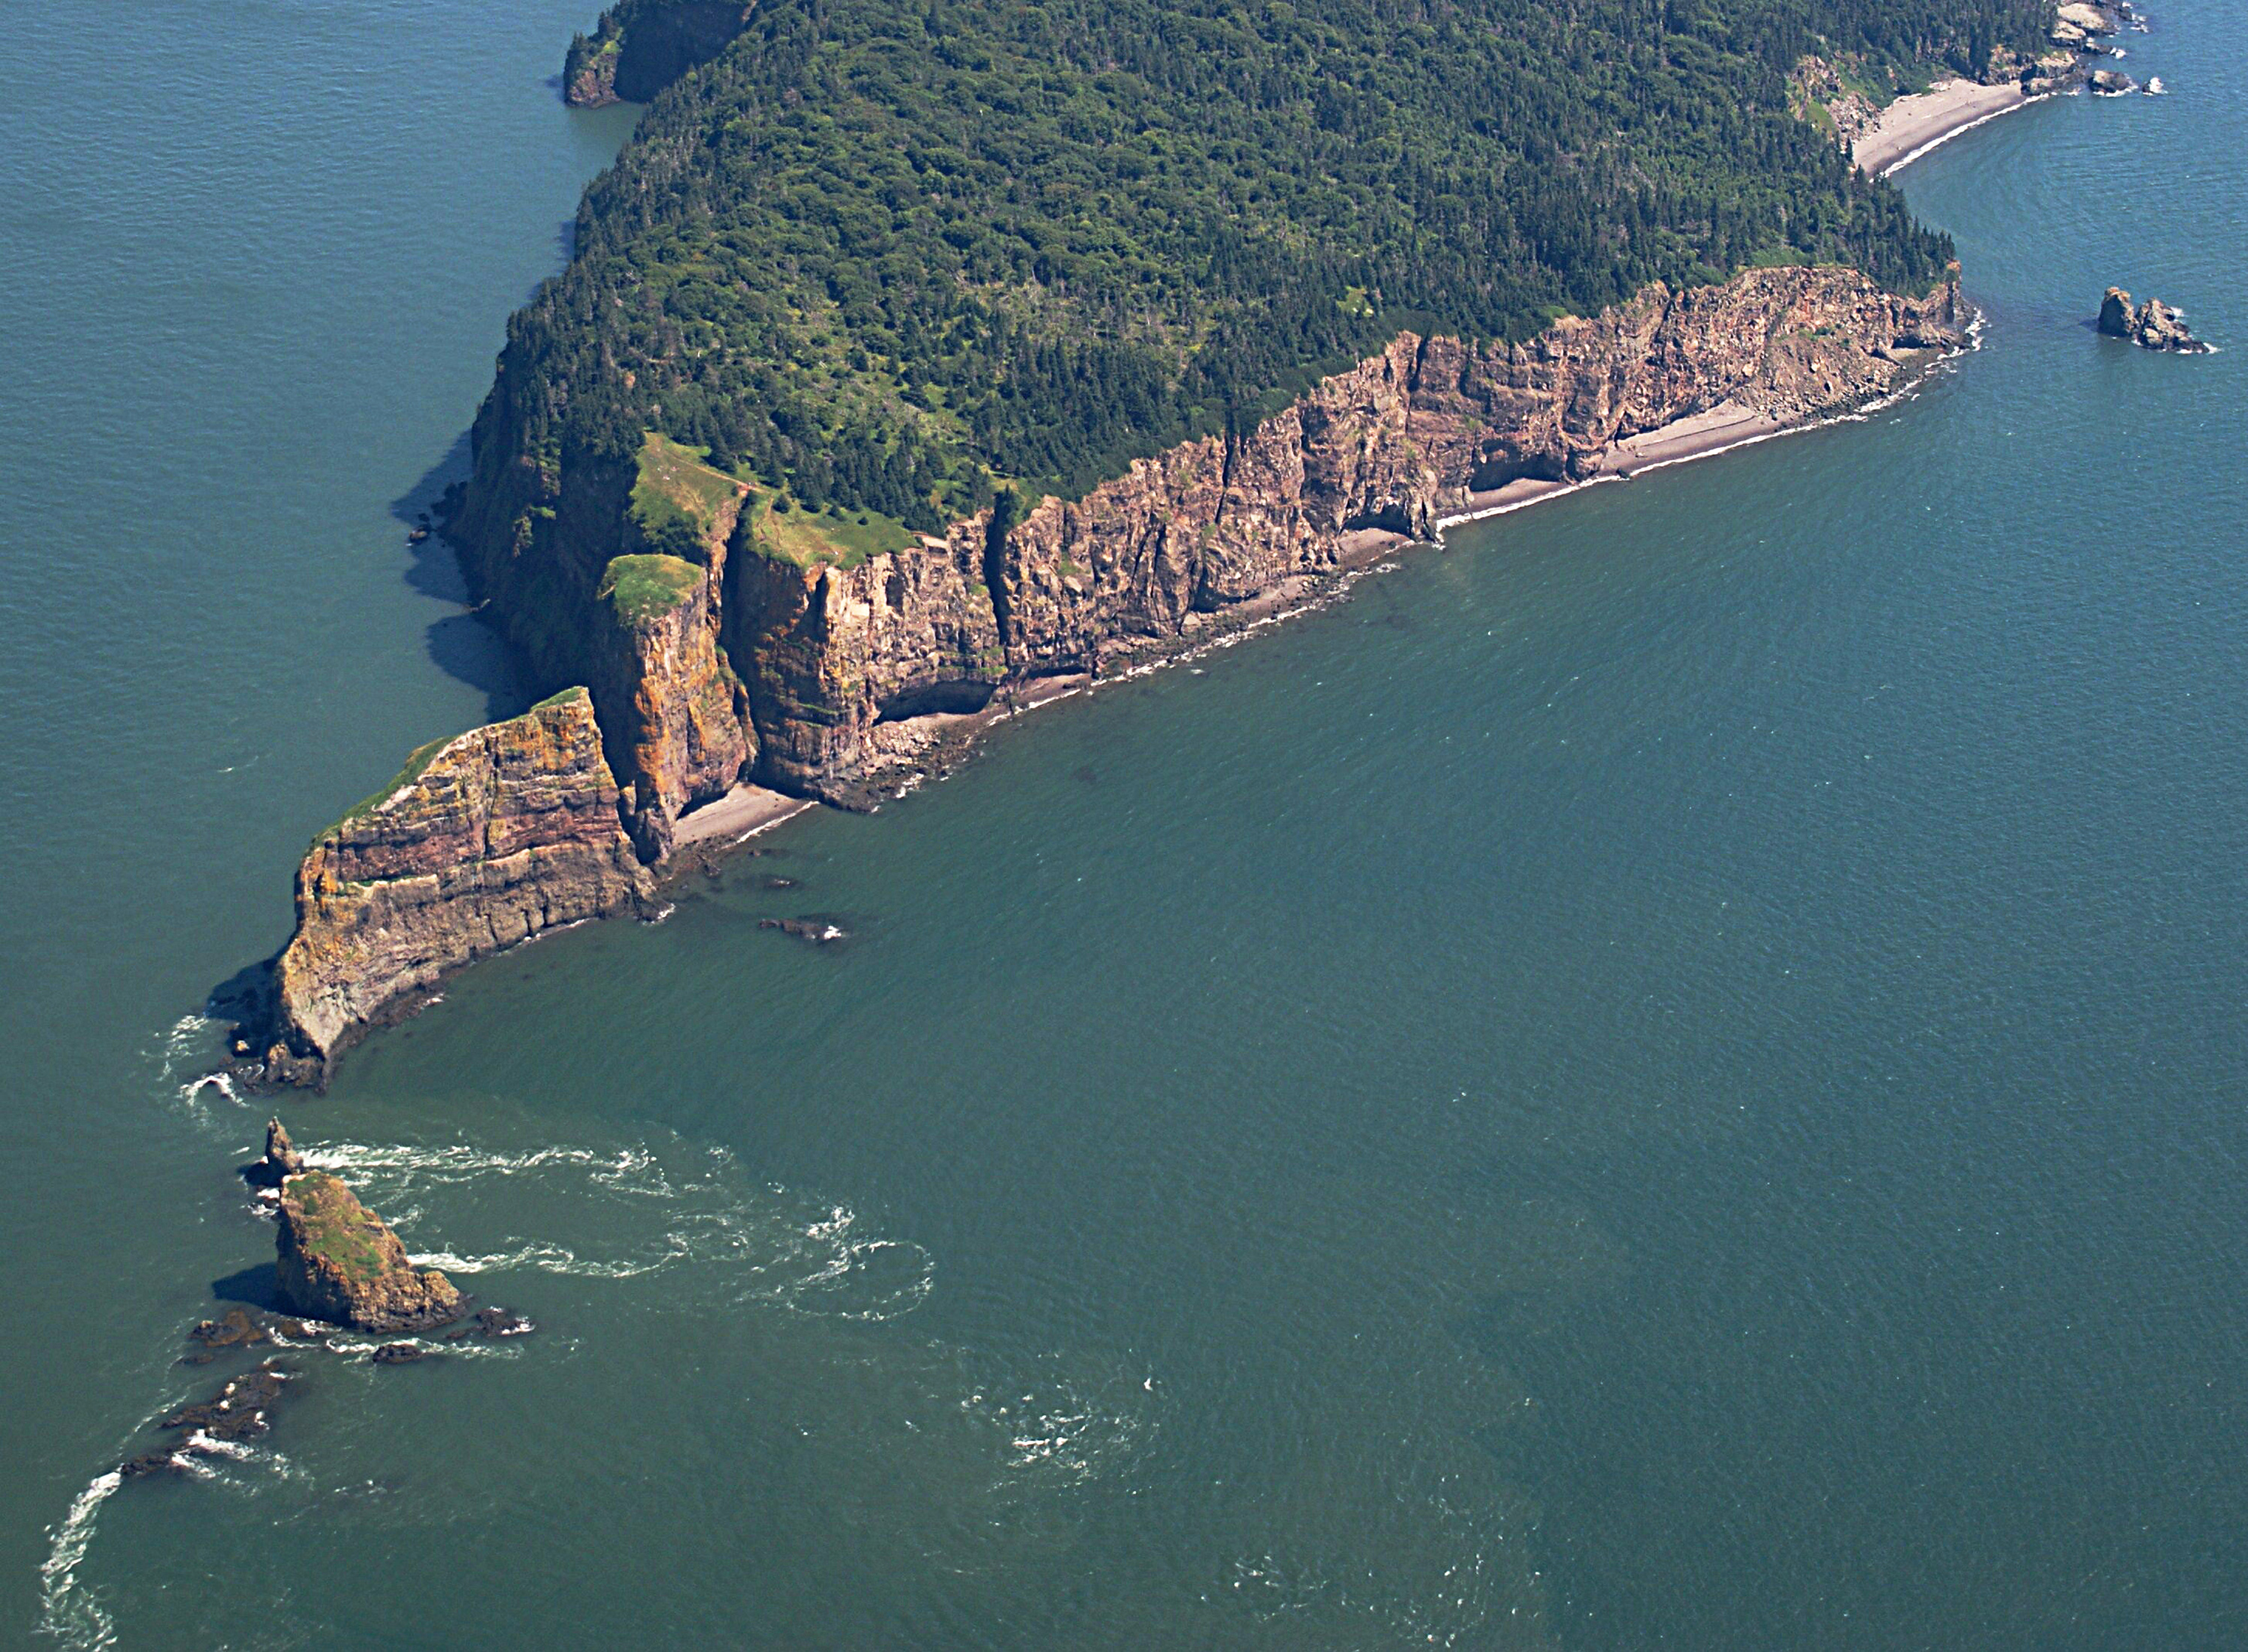 High tides, high adrenaline: the Bay of Fundy